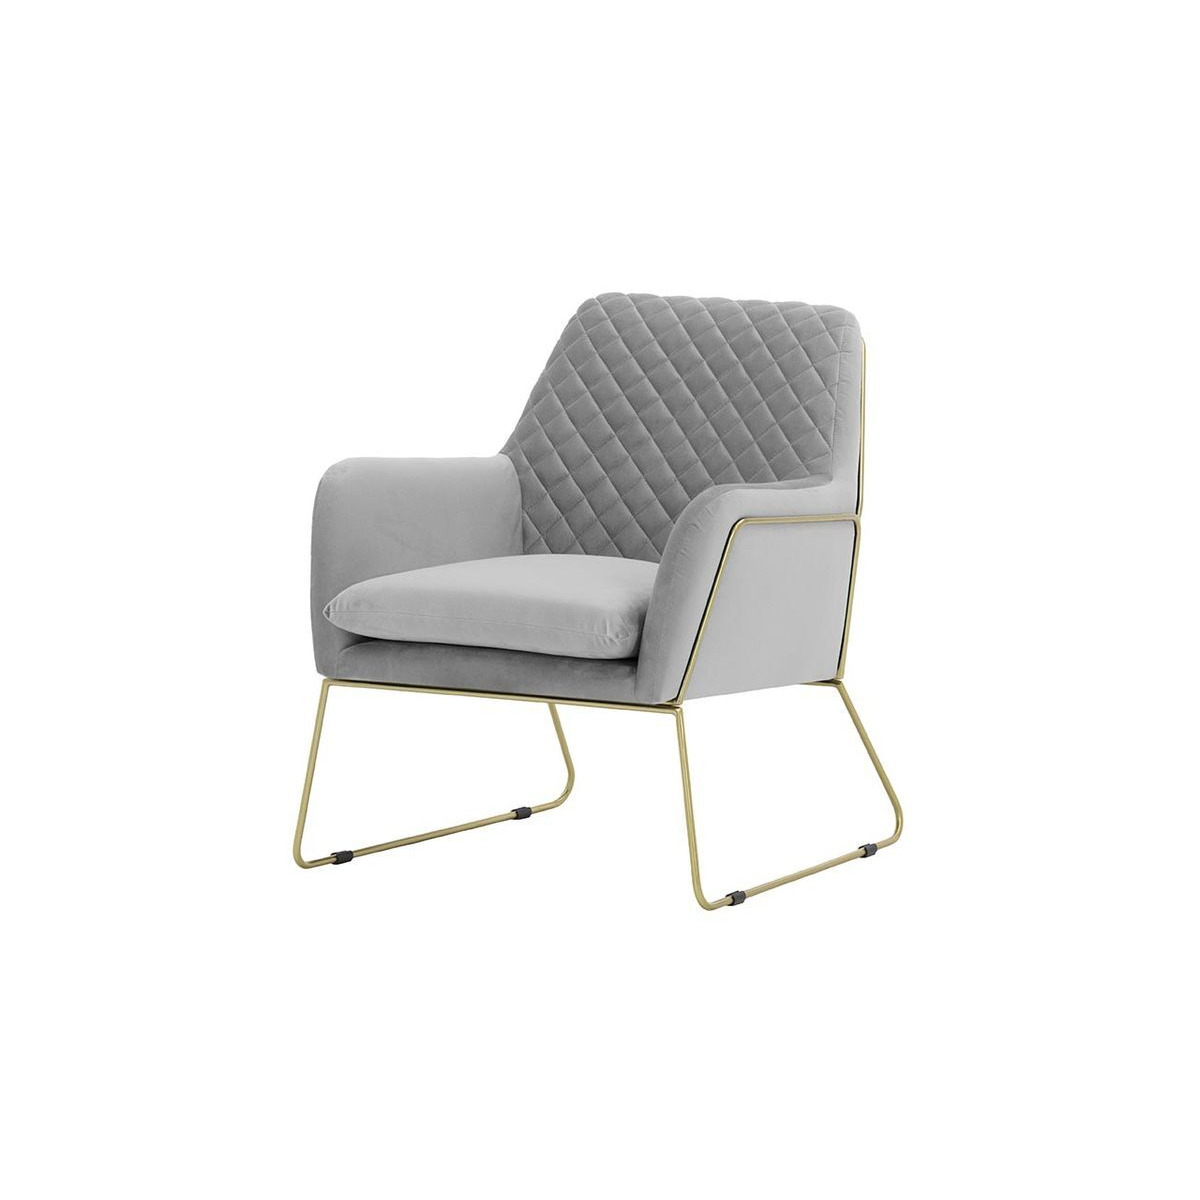 Foxe Metal Frame Armchair with Stitching, silver, Leg colour: gold metal frame - image 1